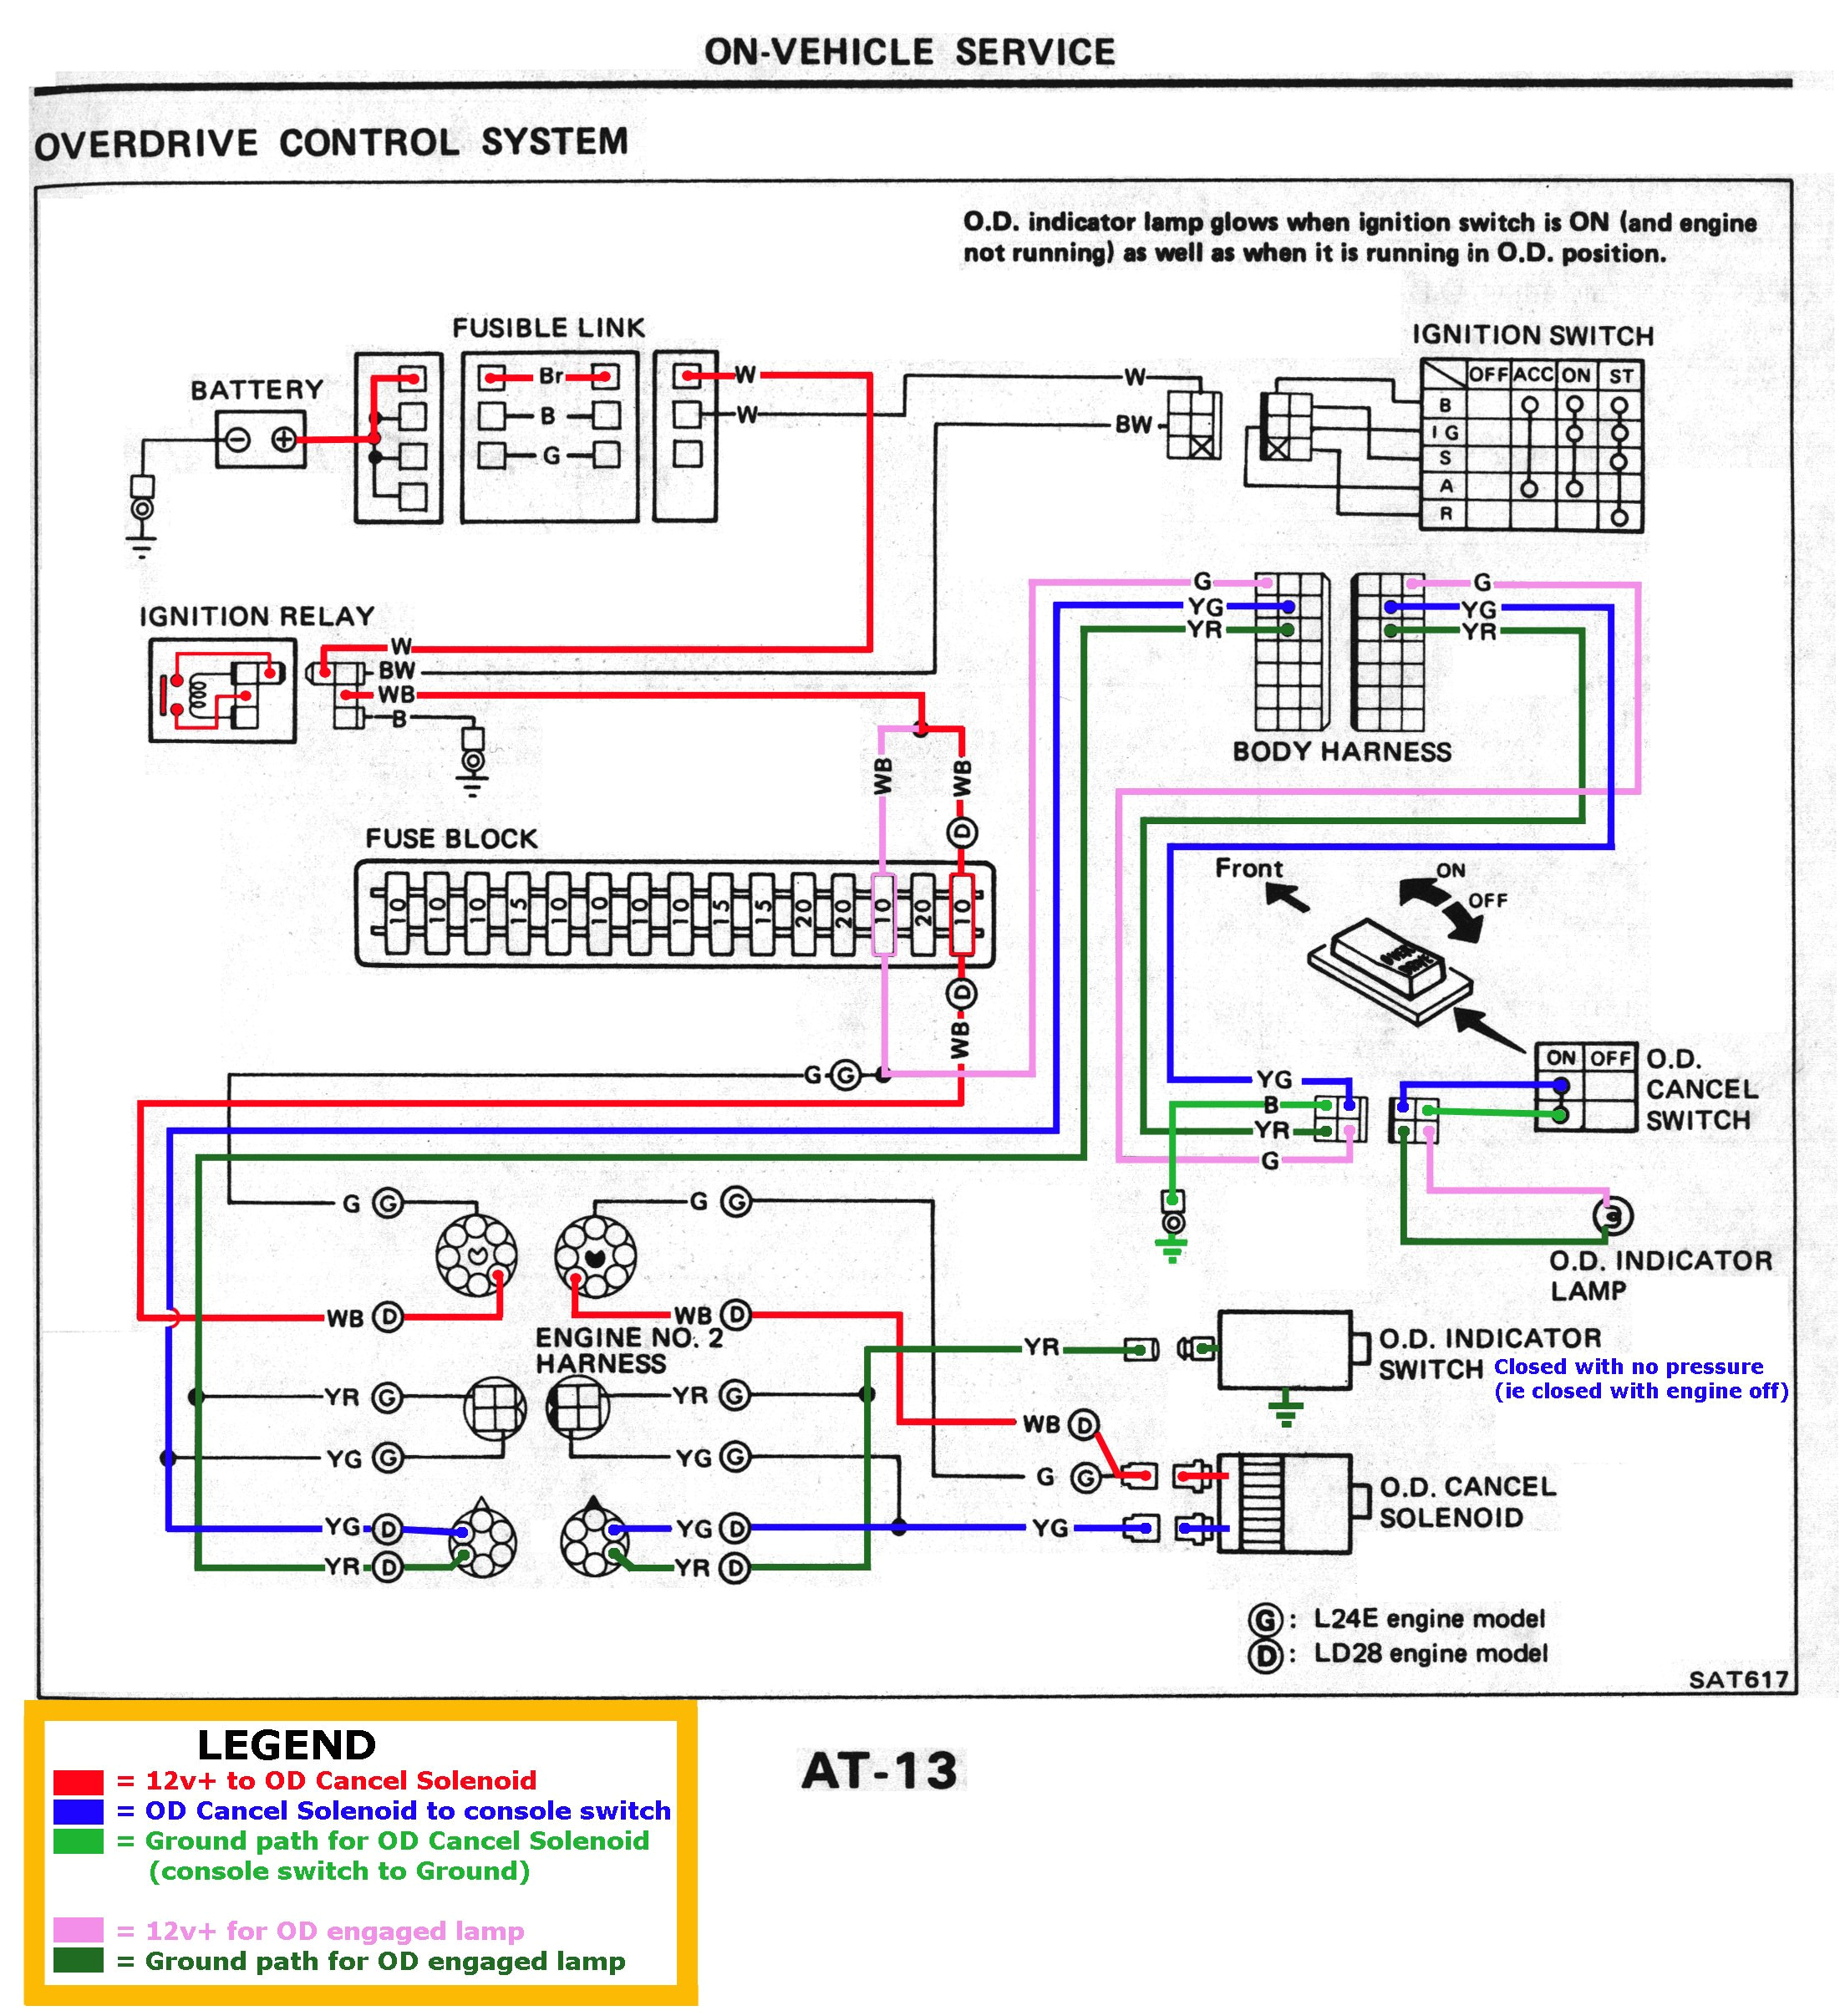 2007 Nissan Altima Stereo Wiring Diagram 1998 Nissan Wiring Diagram Wire Diagram Database